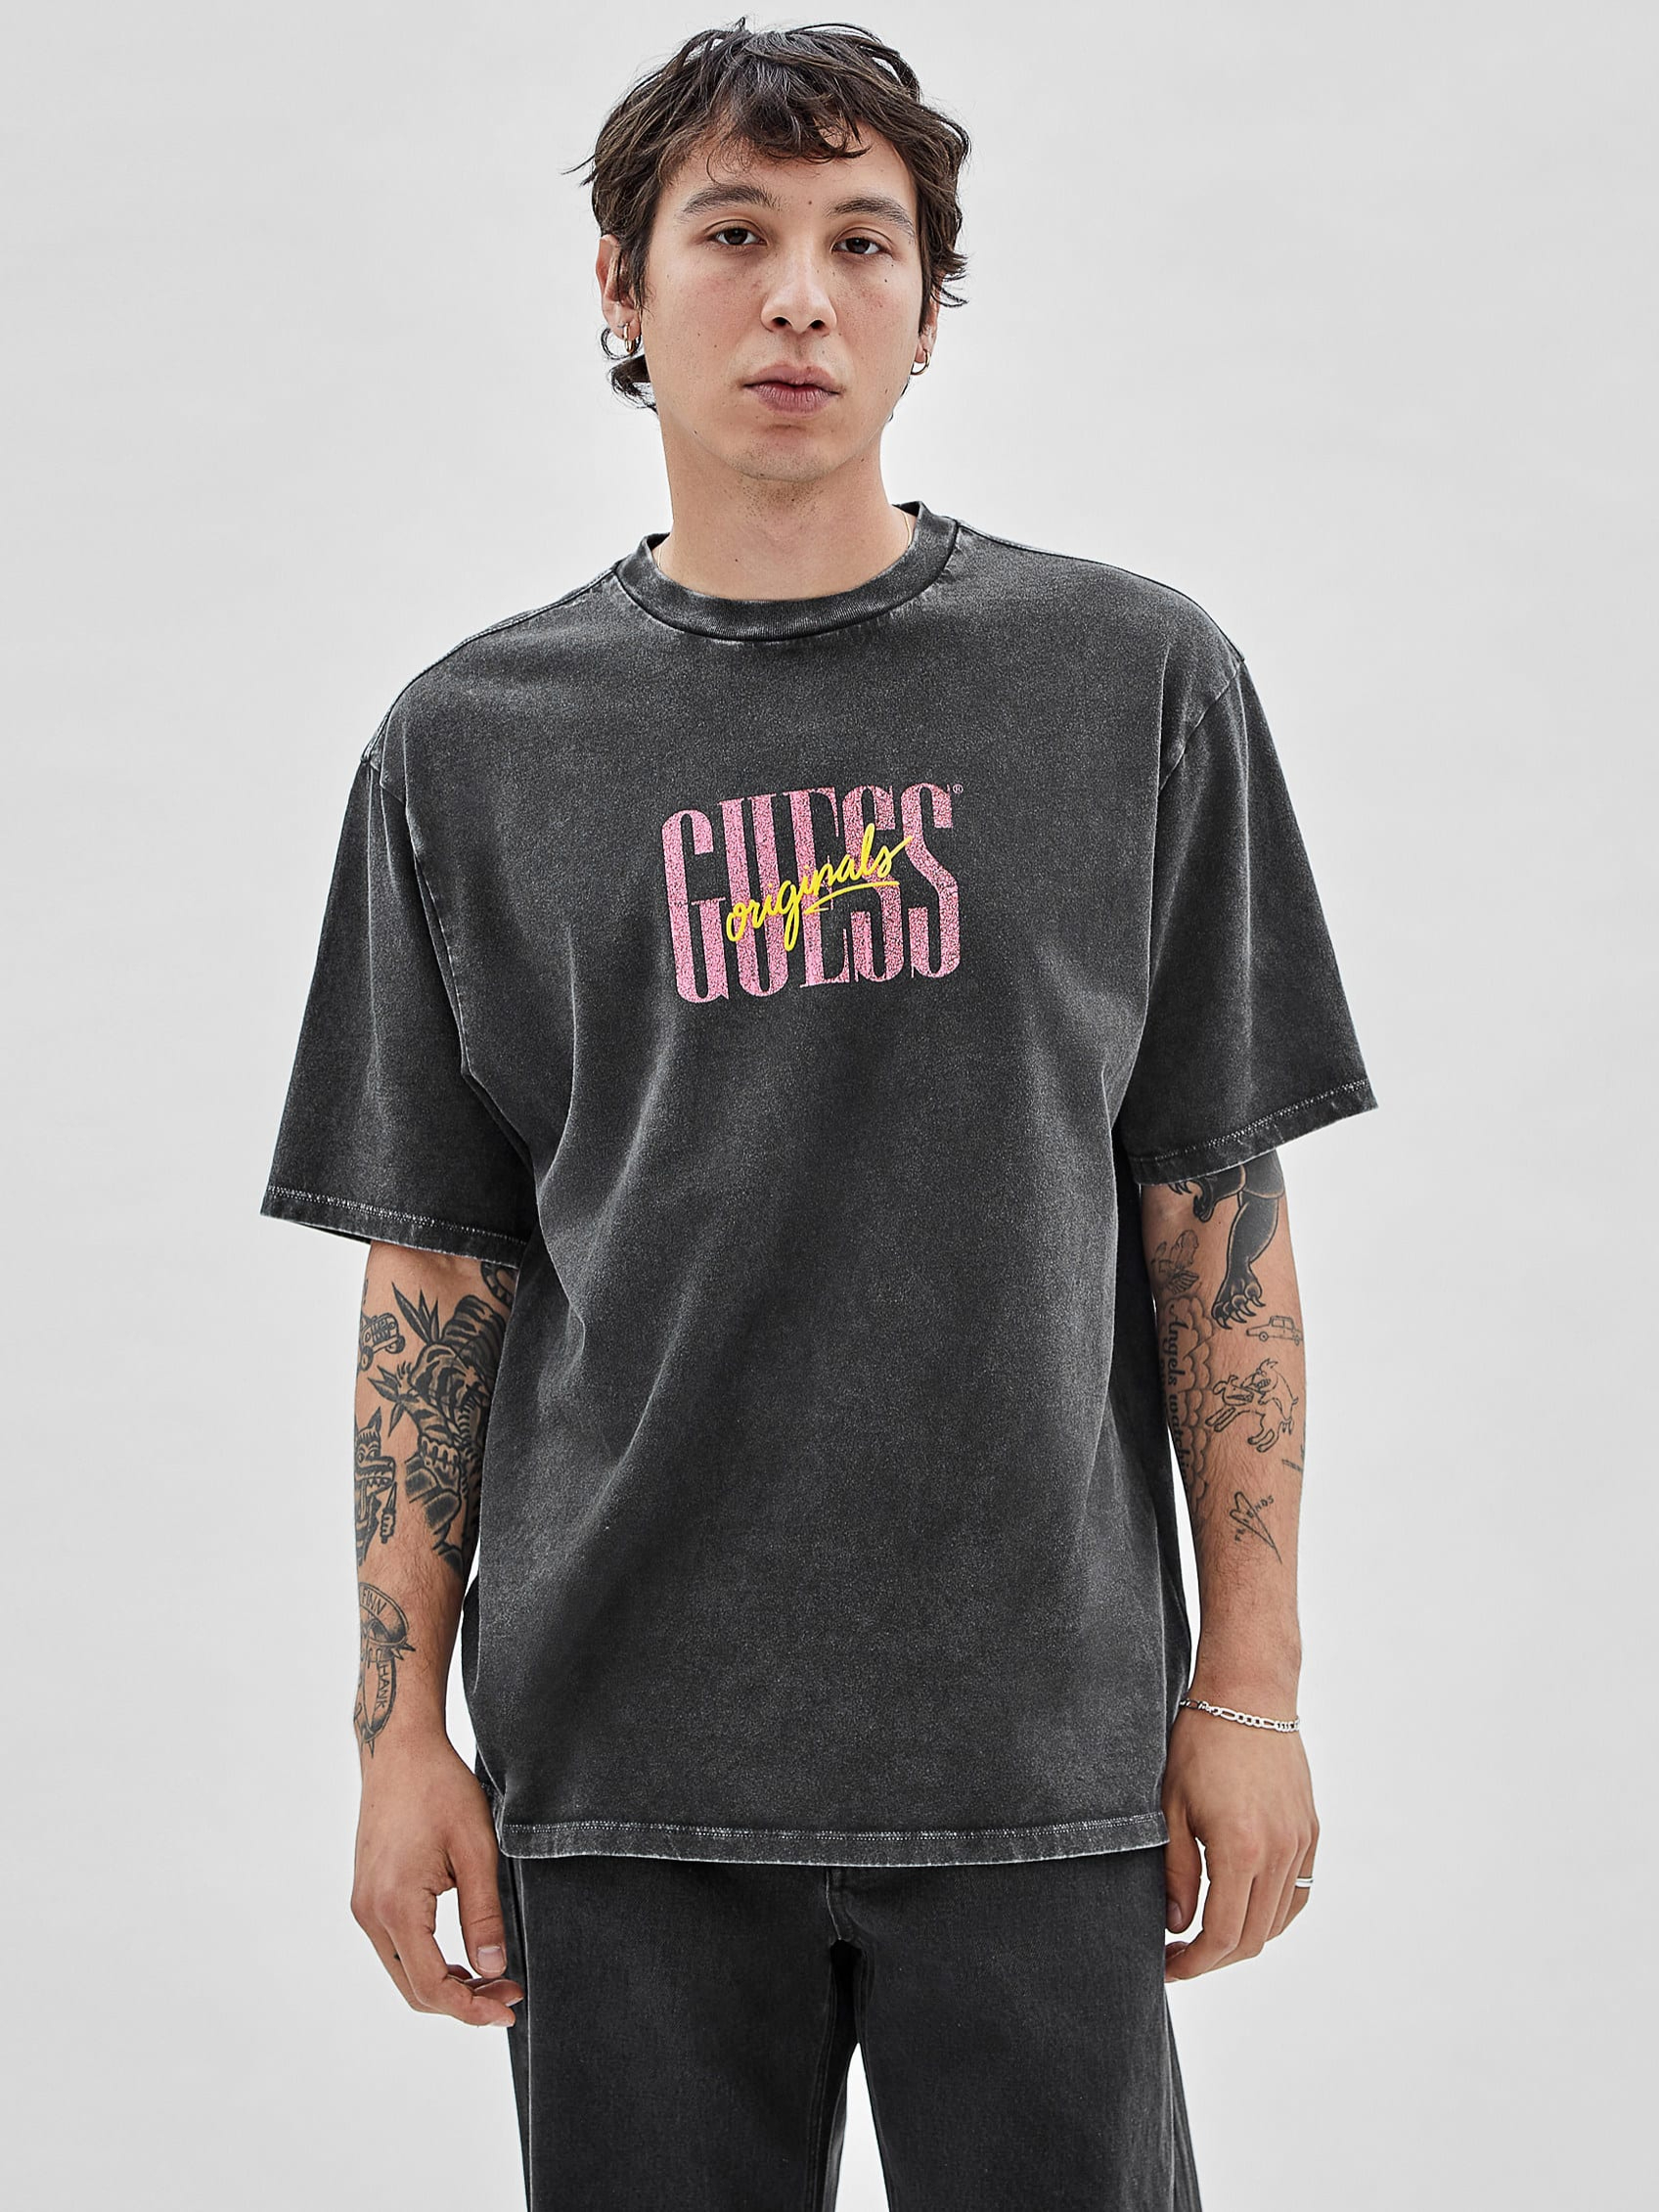 GUESS Originals RODGERS VINTAGE TEE | Guess Philippines